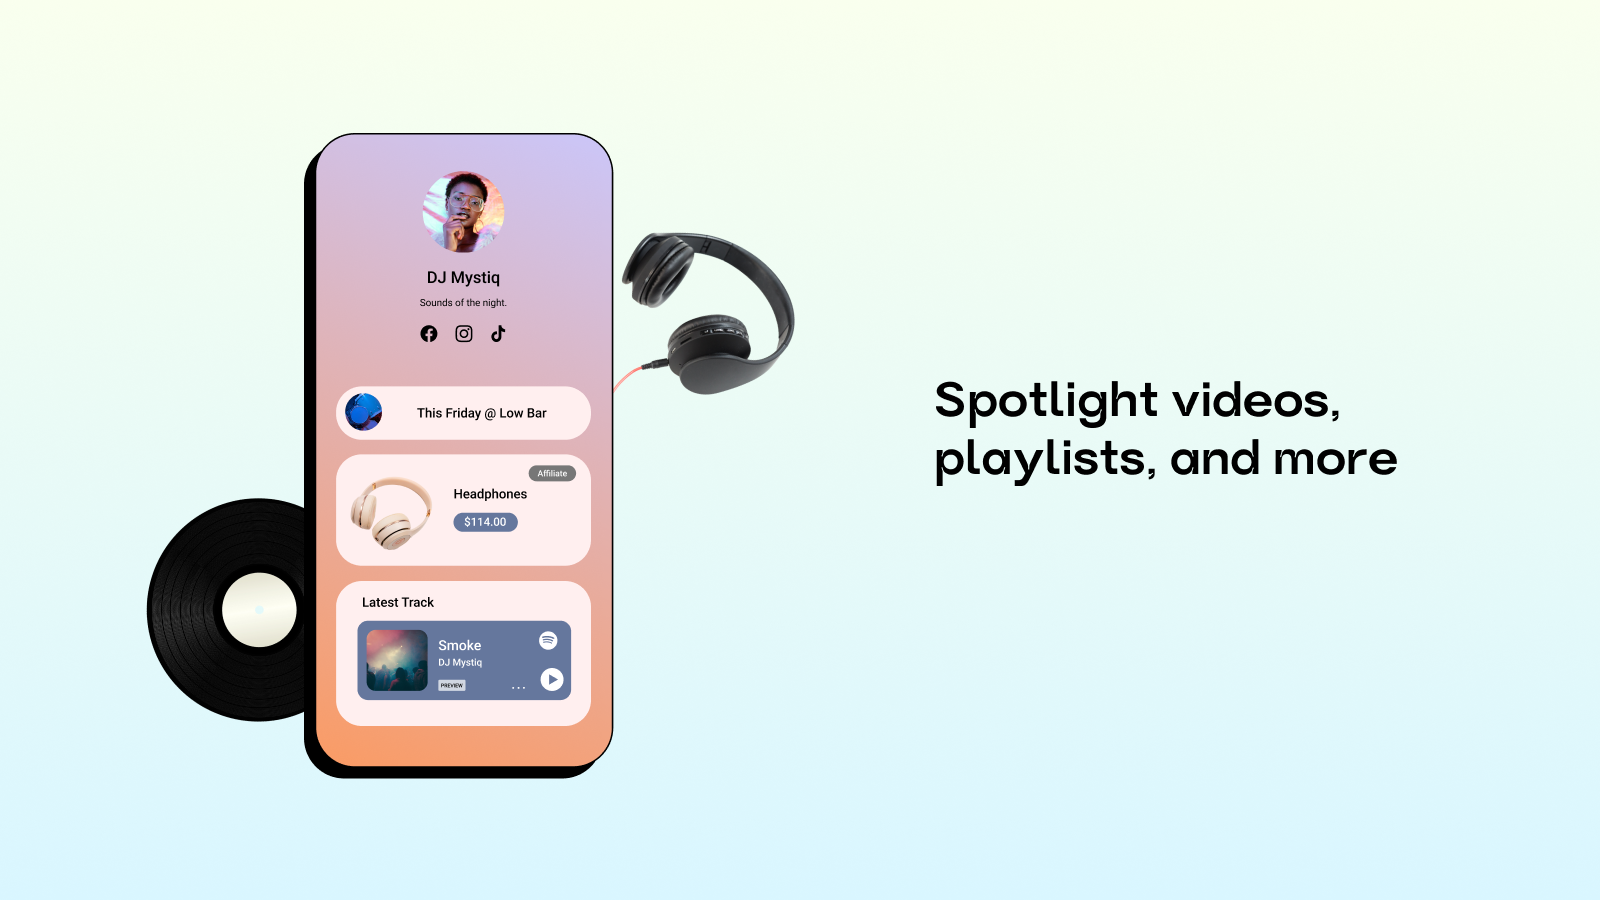 Spotlight videos, playlists, and more